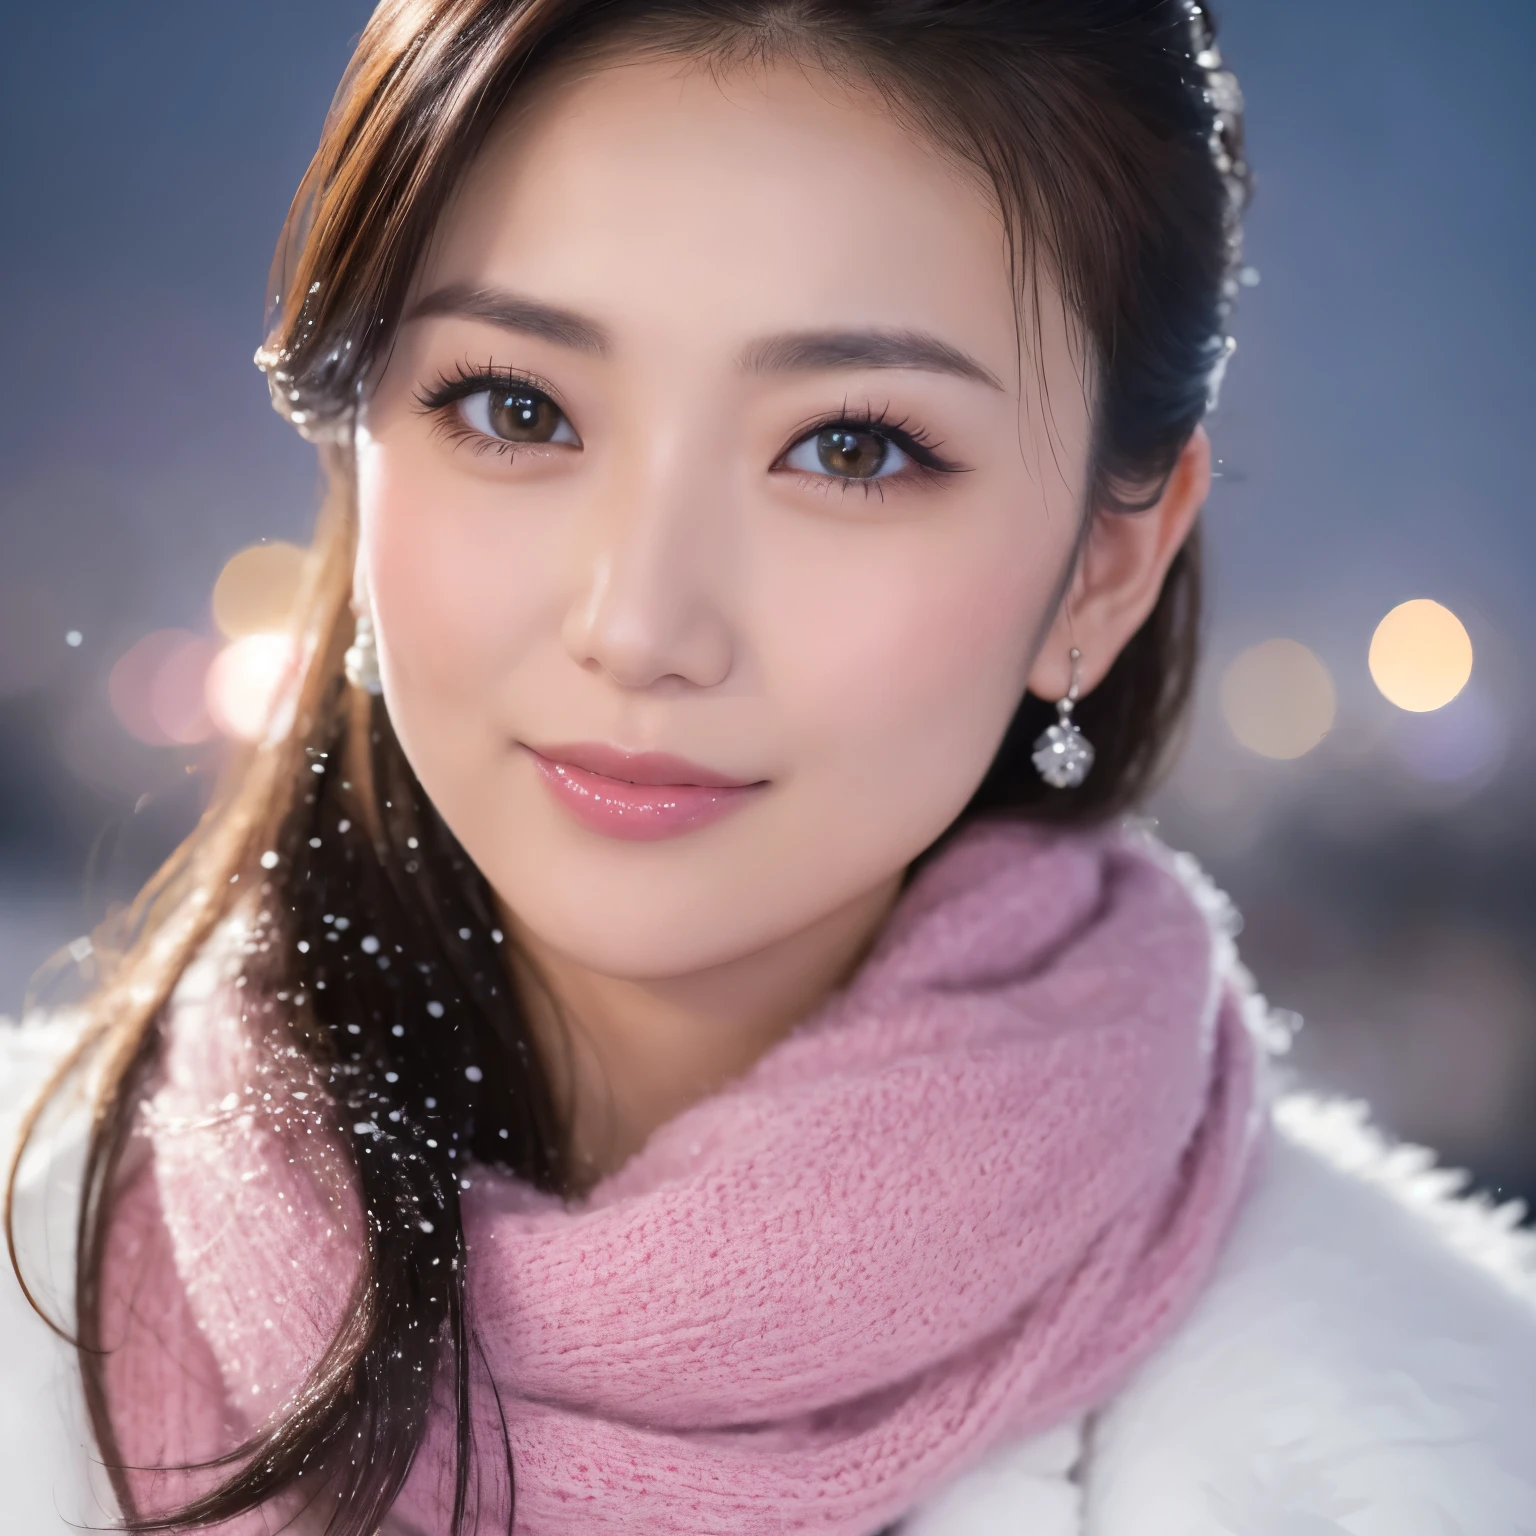 ((highest quality、table top、8K、best image quality、Award-winning work))、one beautiful woman、smile looking at me、(close up of face:1.6)、(Perfect and most natural pink long scarf:1.2)、(Elegant gray thick coat:1.1)、epic movie lighting、(romantic love feelings:1.1)、(The most romantic and moody atmosphere:1.1)、winter city、Snowy landscape in the city、(The snow in the air sparkles finely:1.1)、(It&#39;s snowing heavily:1.1)、(Tyndall effect:1.1)、(Night view of the city with snow falling:1.2)、Shining beautiful skin、(accurate anatomy:1.1)、Ultra high definition beauty face、long eyelashes、natural makeup、ultra high definition hair、Ultra high definition eyes、(Shining beautiful skin with ultra-high resolution:1.1)、Super high resolution glossy lips、radiant beautiful skin